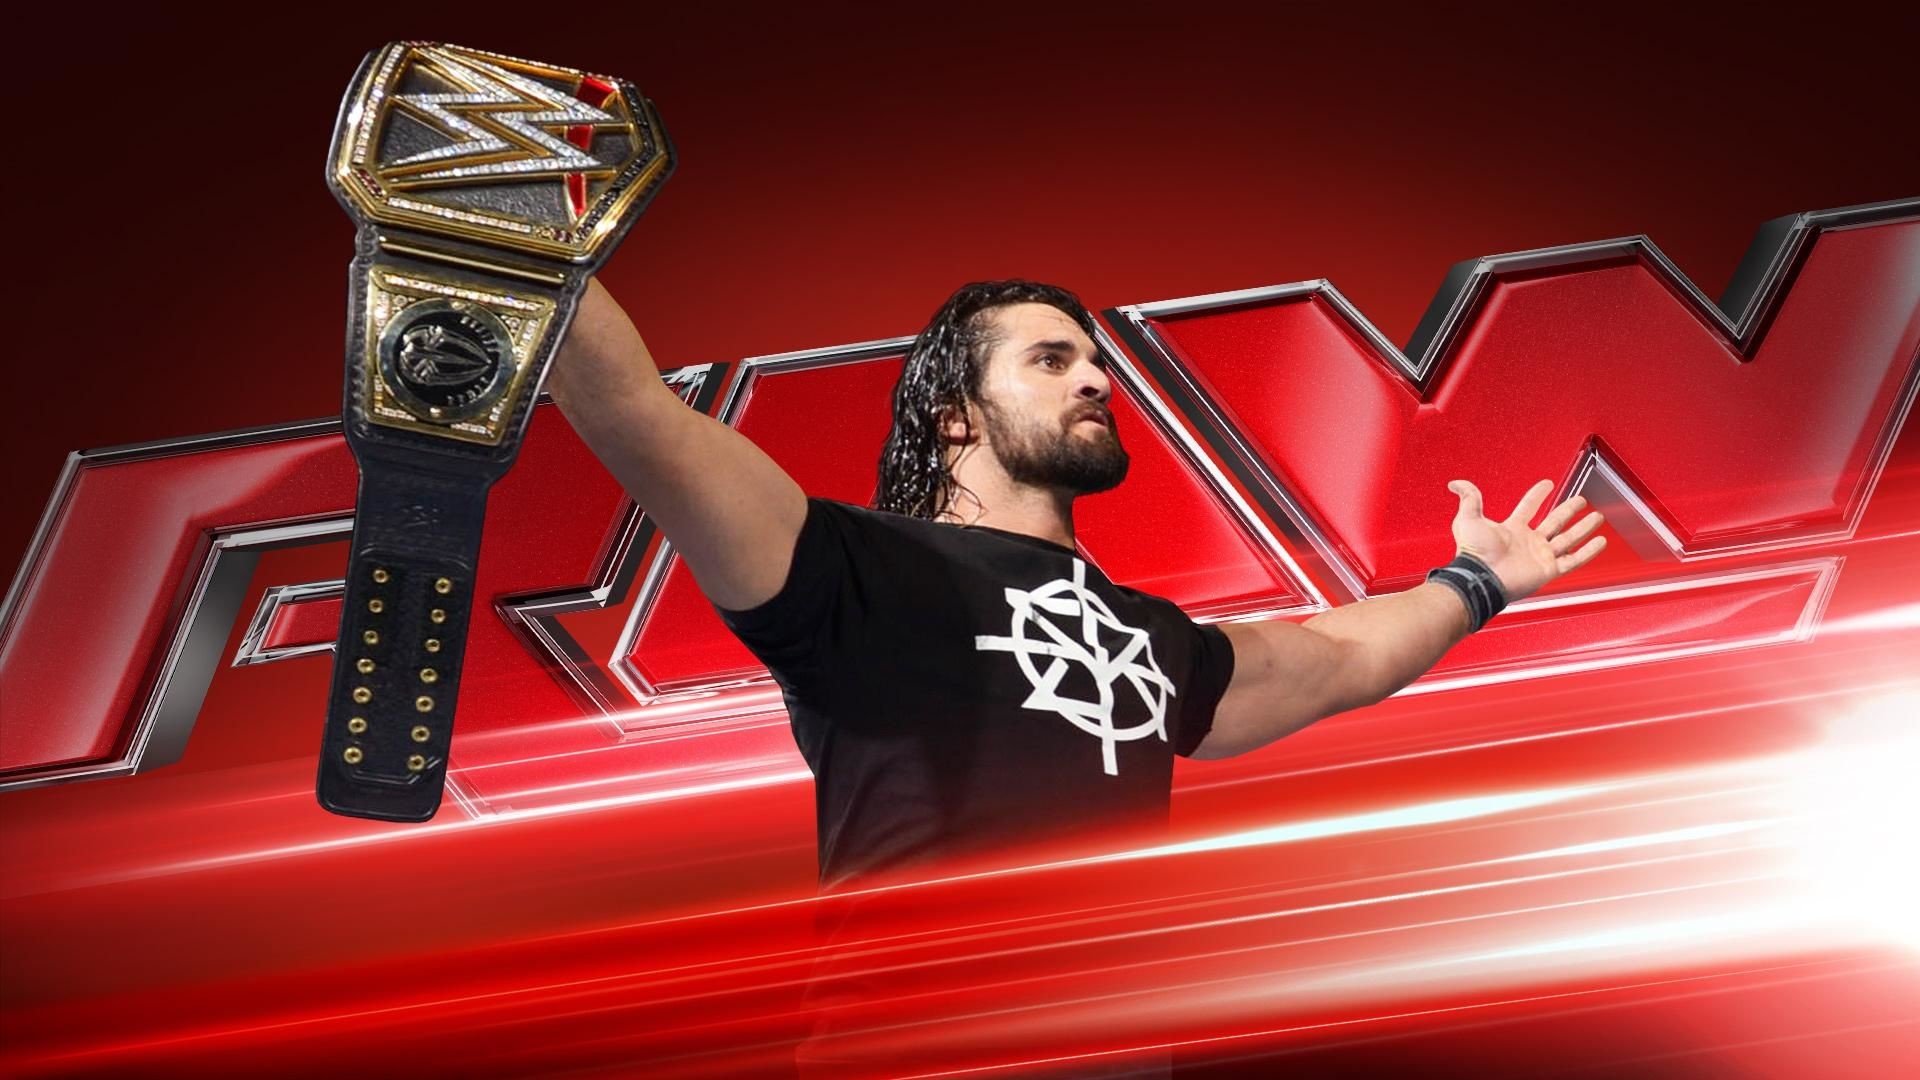 1920x1080 This site contains information about Seth rollins wallpaper champion.